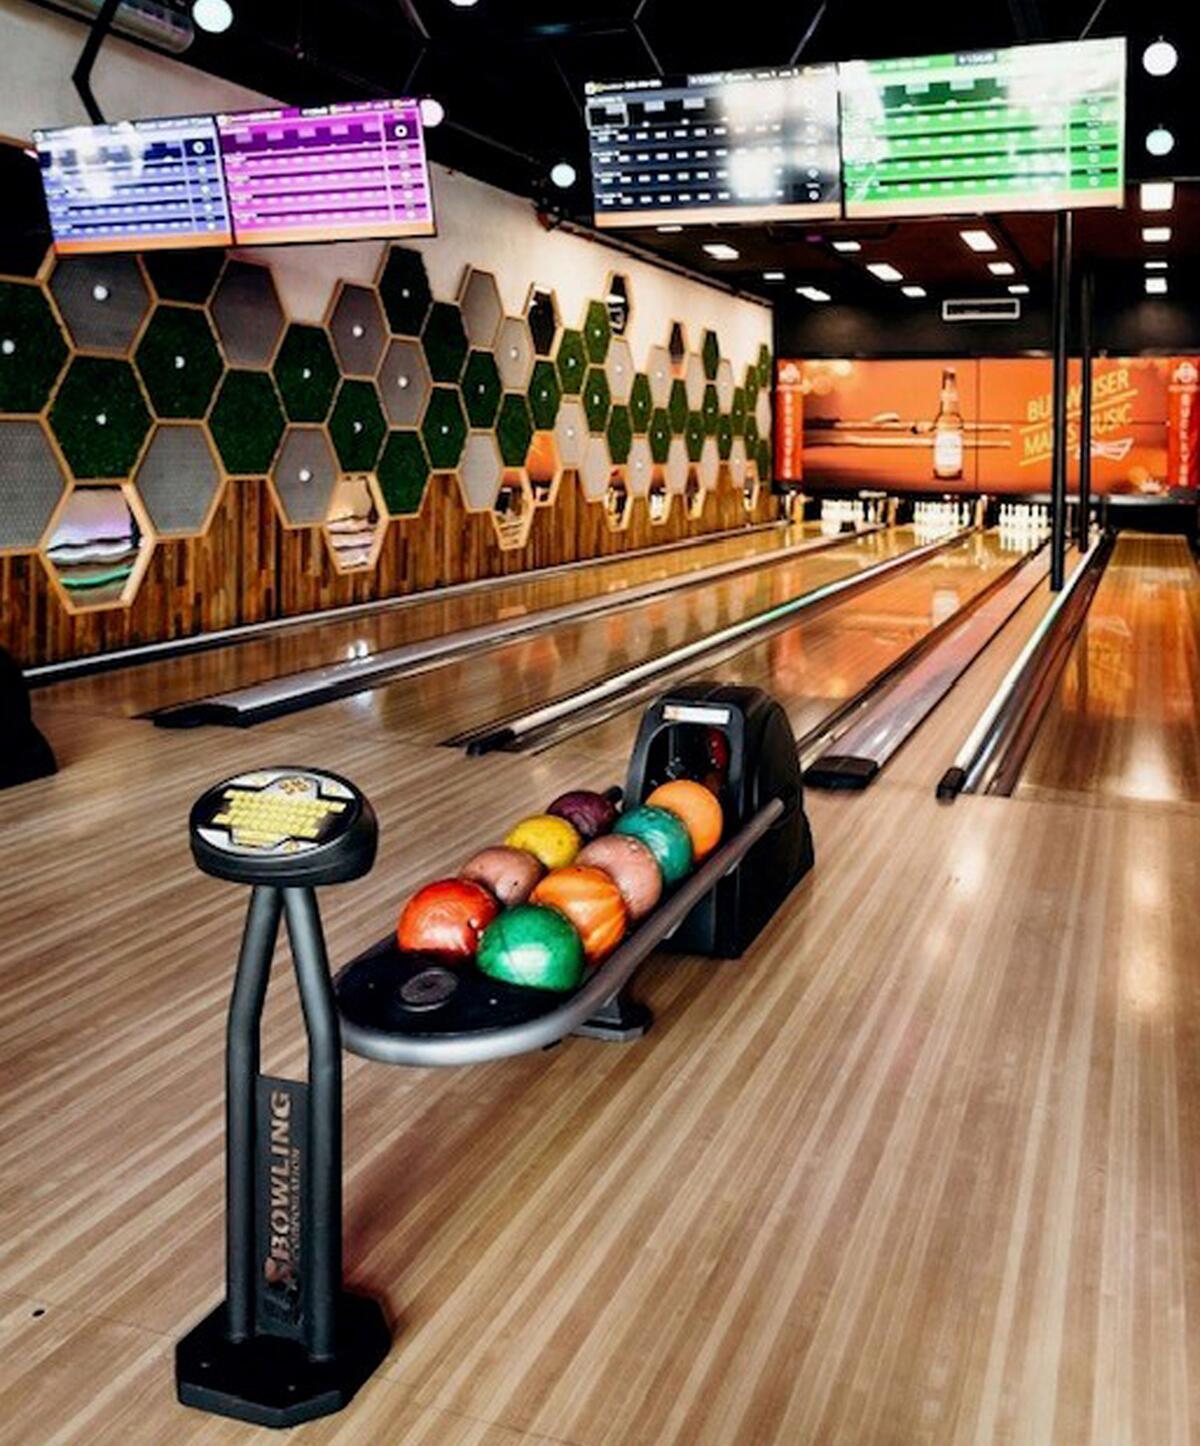 There is a four-lane bowling alley inside Break Point Pacific Beach.